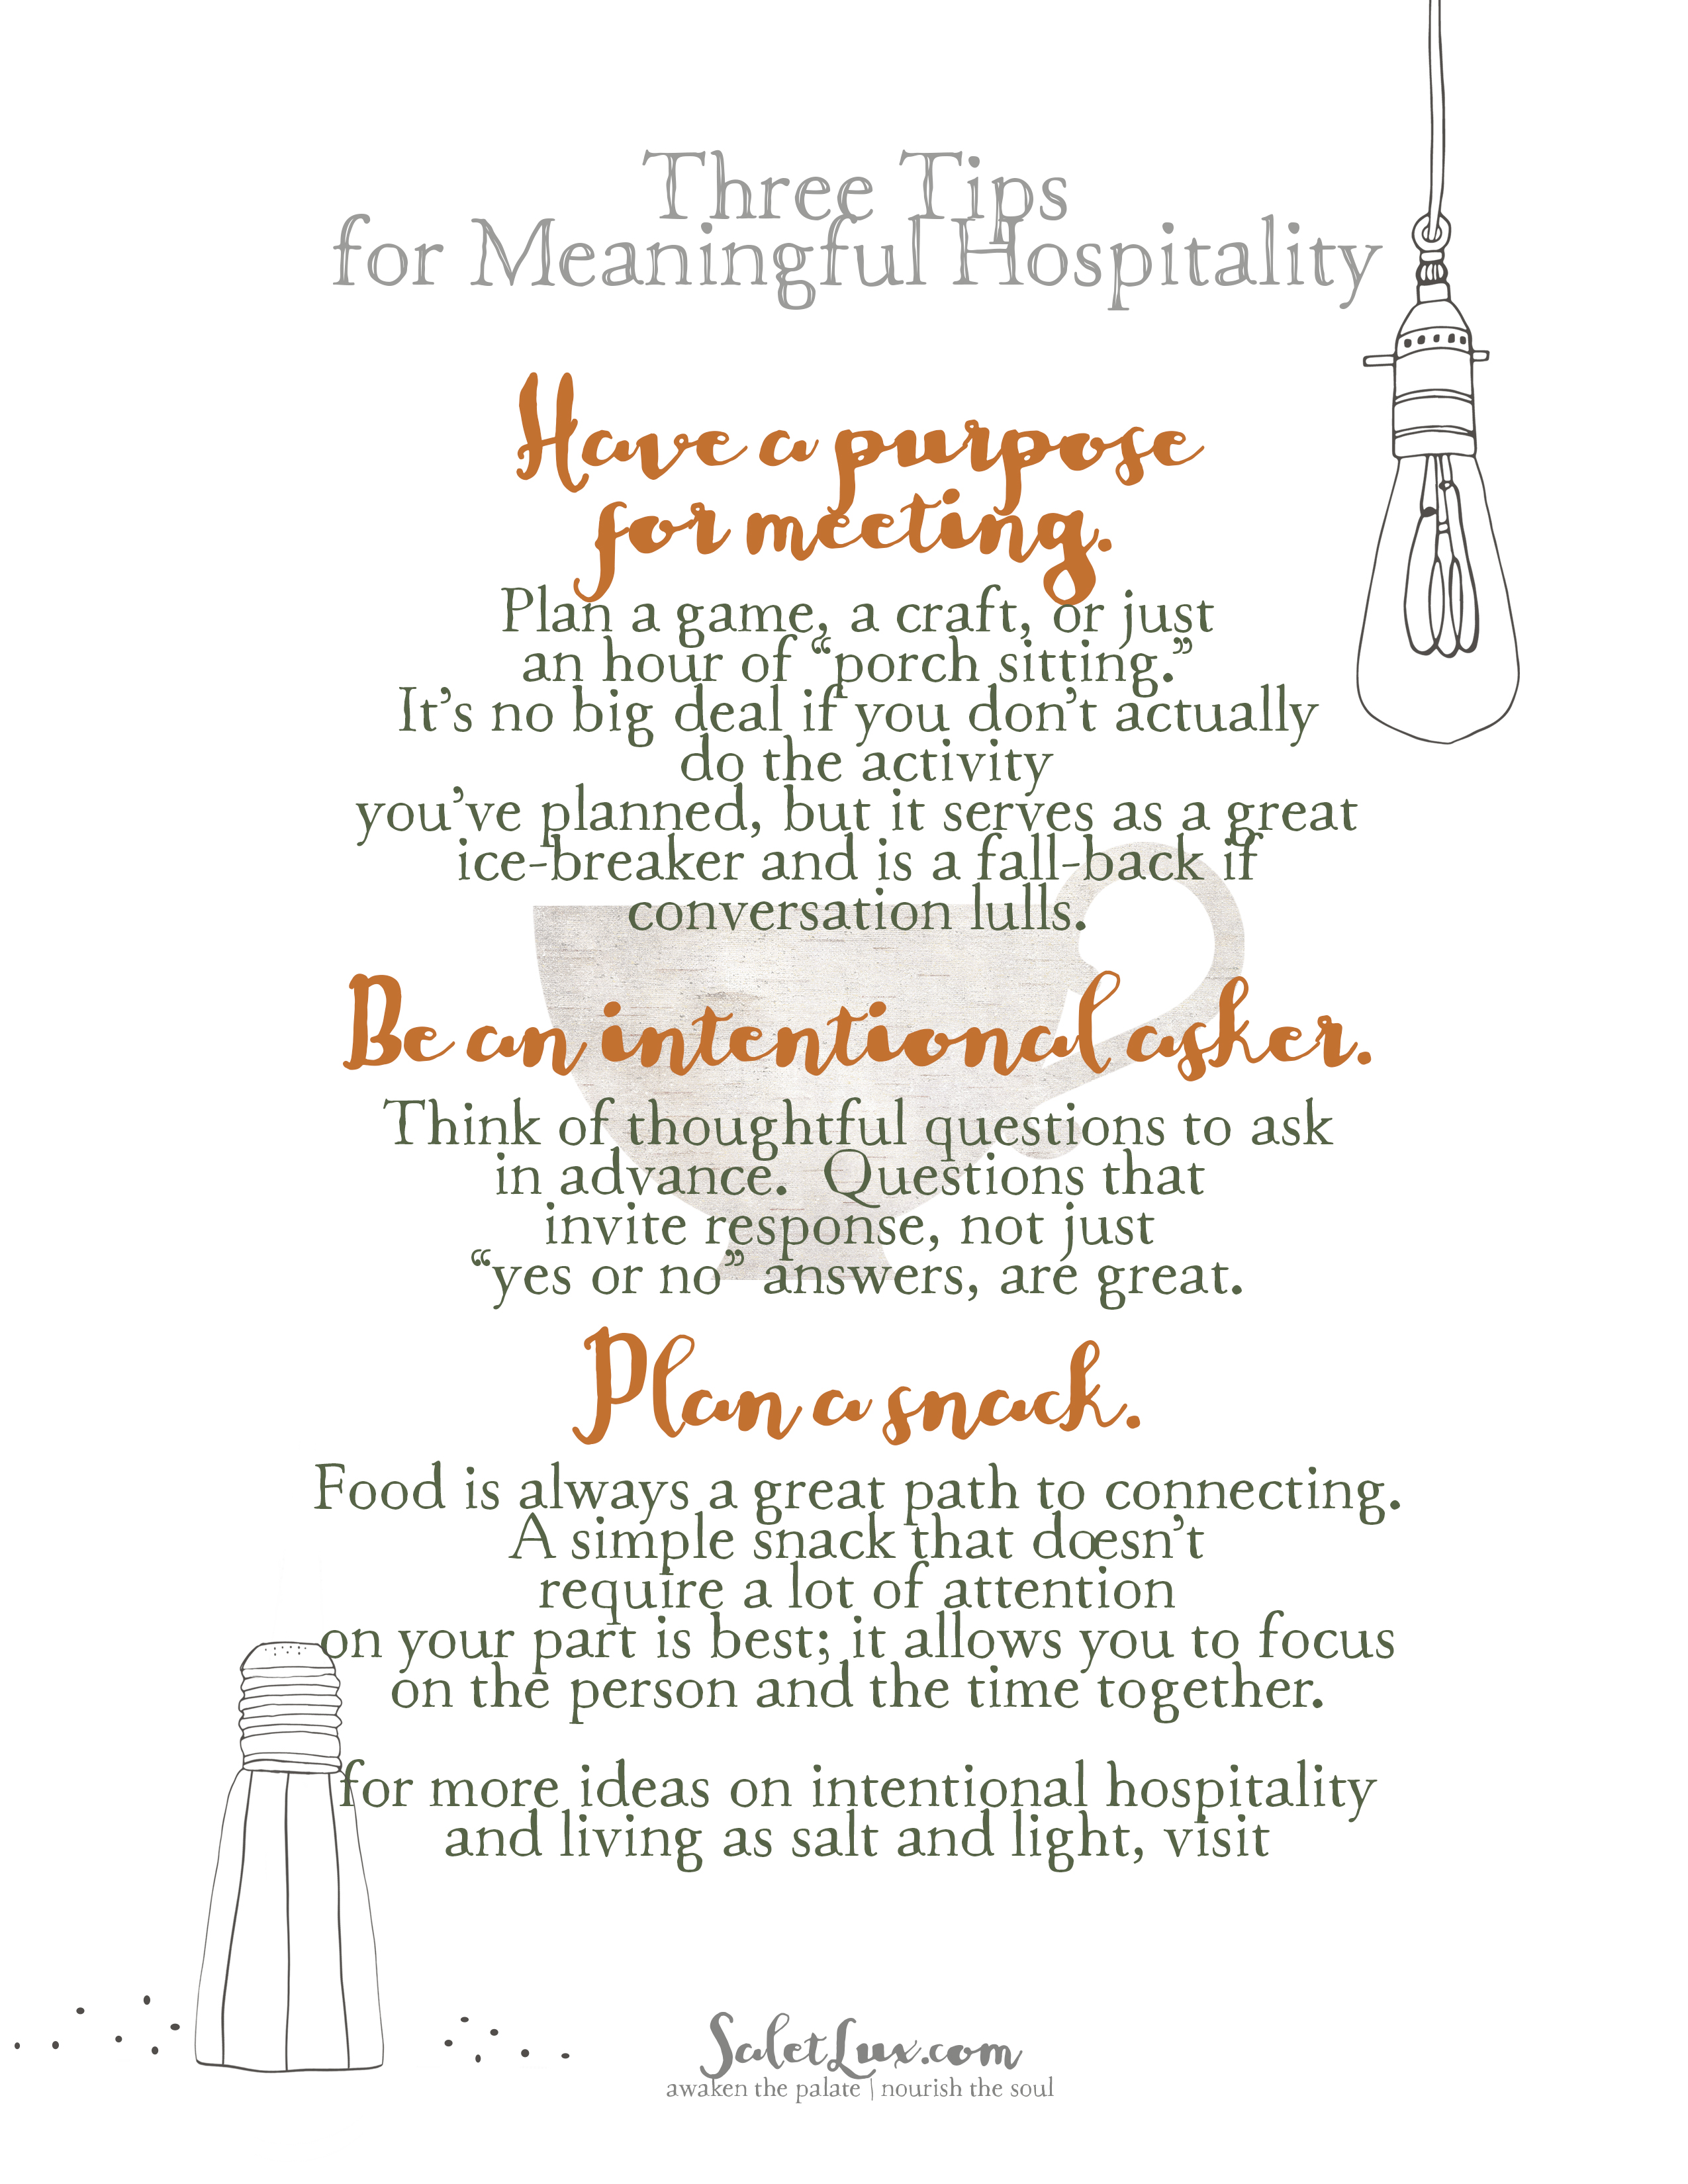 tips for meaningful hospitality - free printables